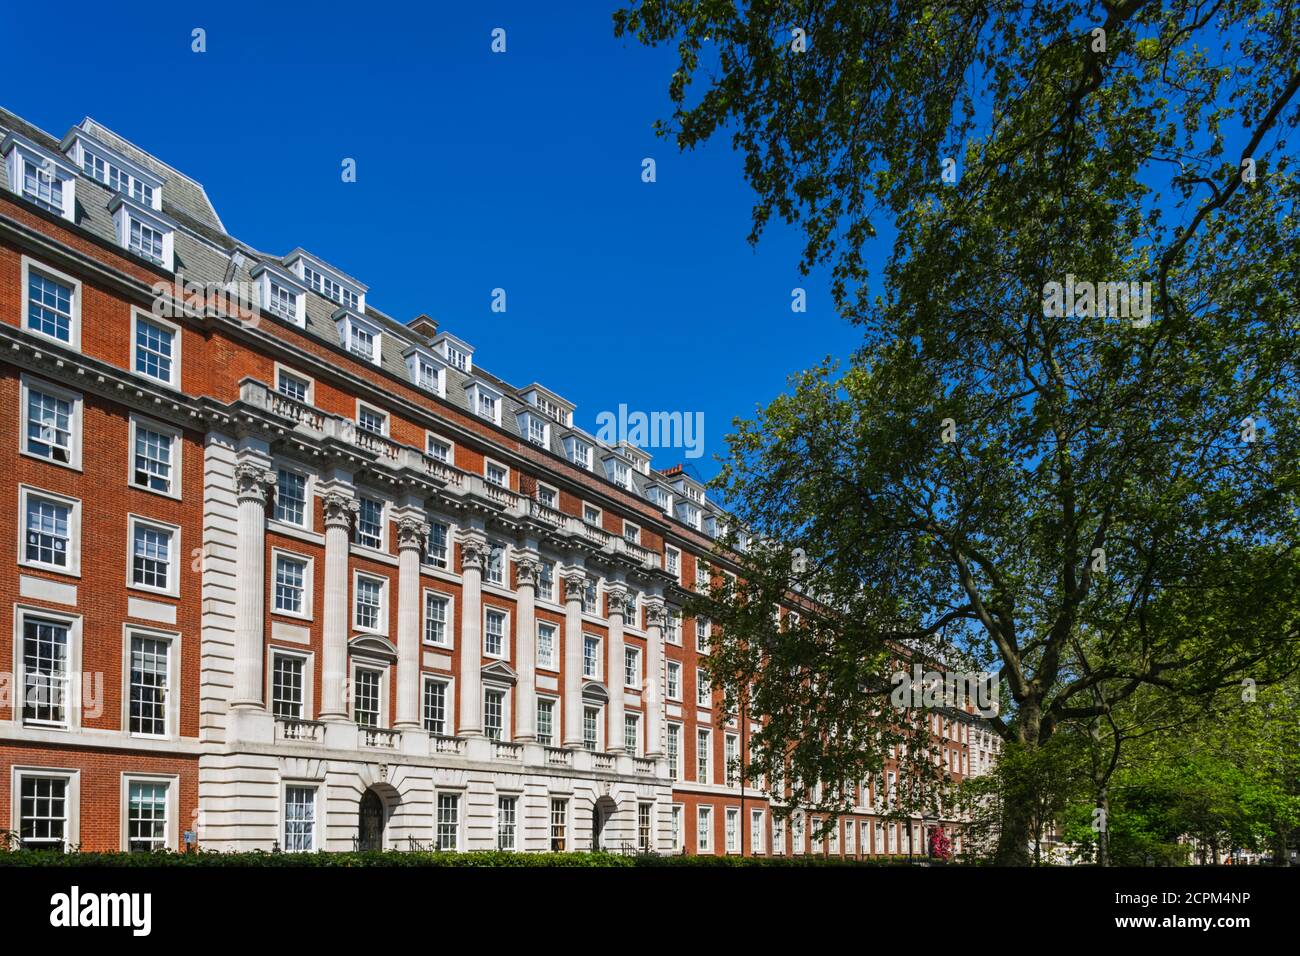 England, London, Westminster, Mayfair, Grosvenor Square, Residential Housing and Mansions Stock Photo